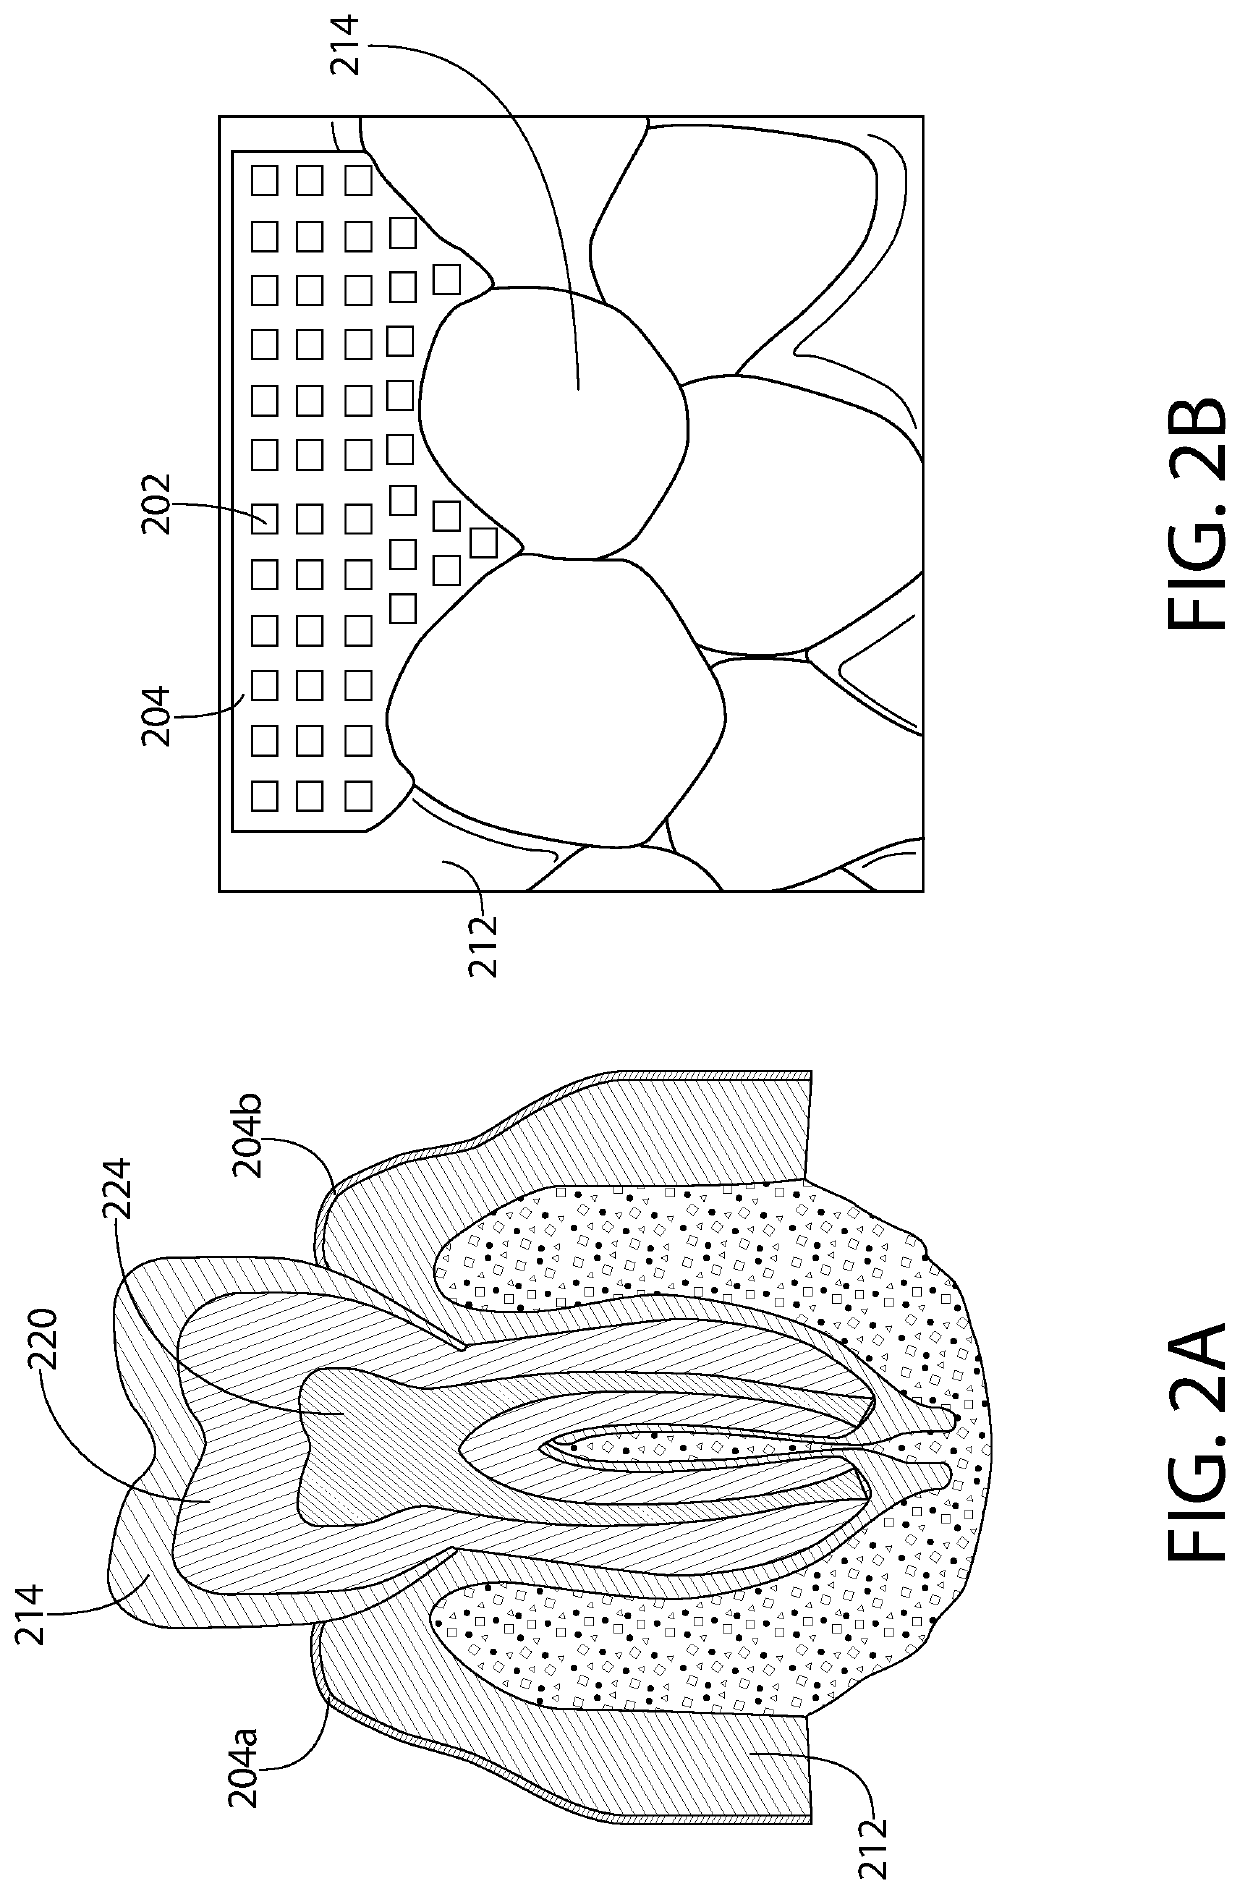 System and Method for Oral Health Monitoring Using Electrical Impedance Tomography